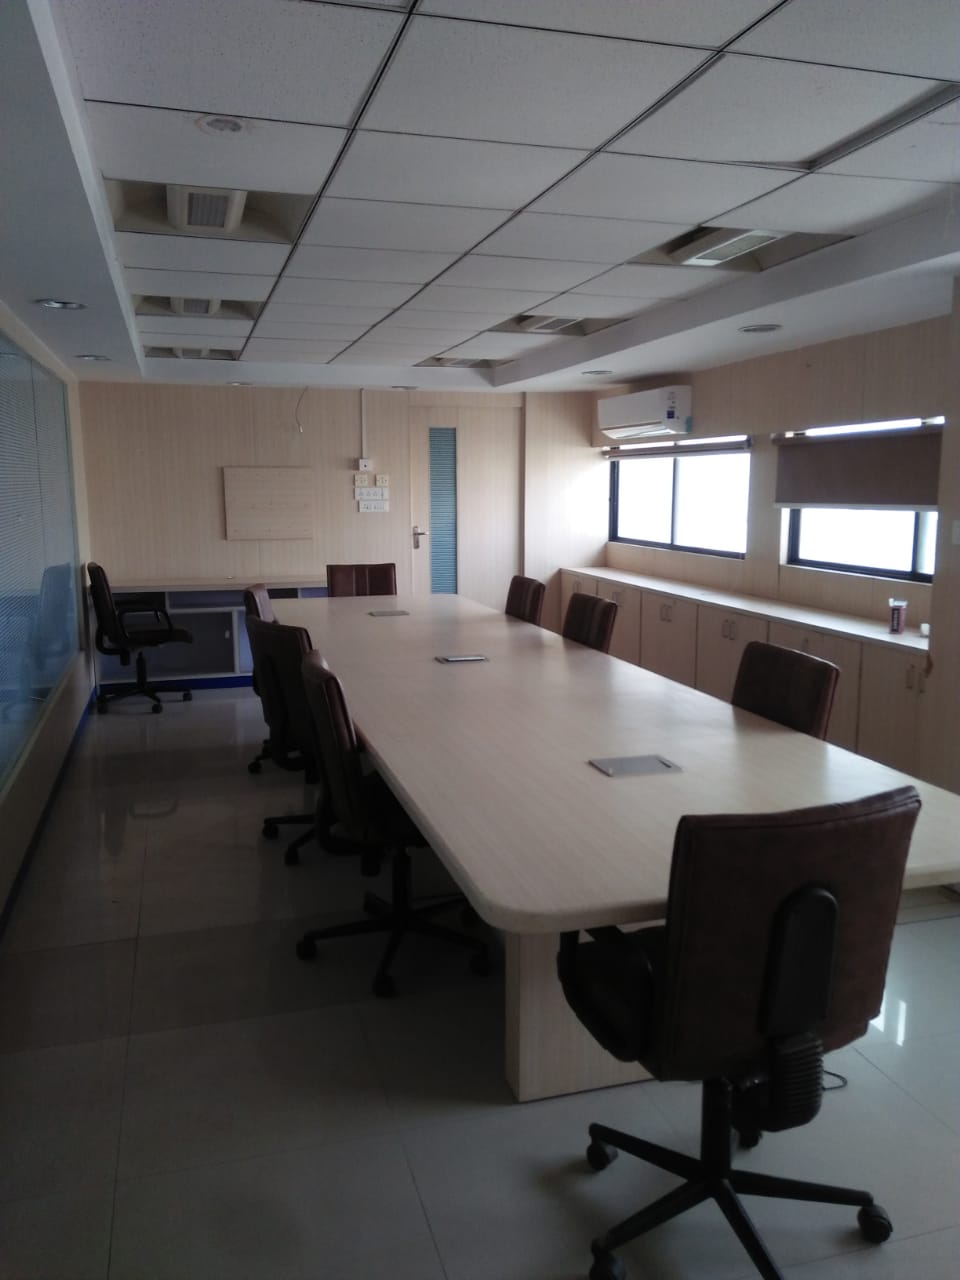 Pre-Leased Office for Sale in Limda Chowk